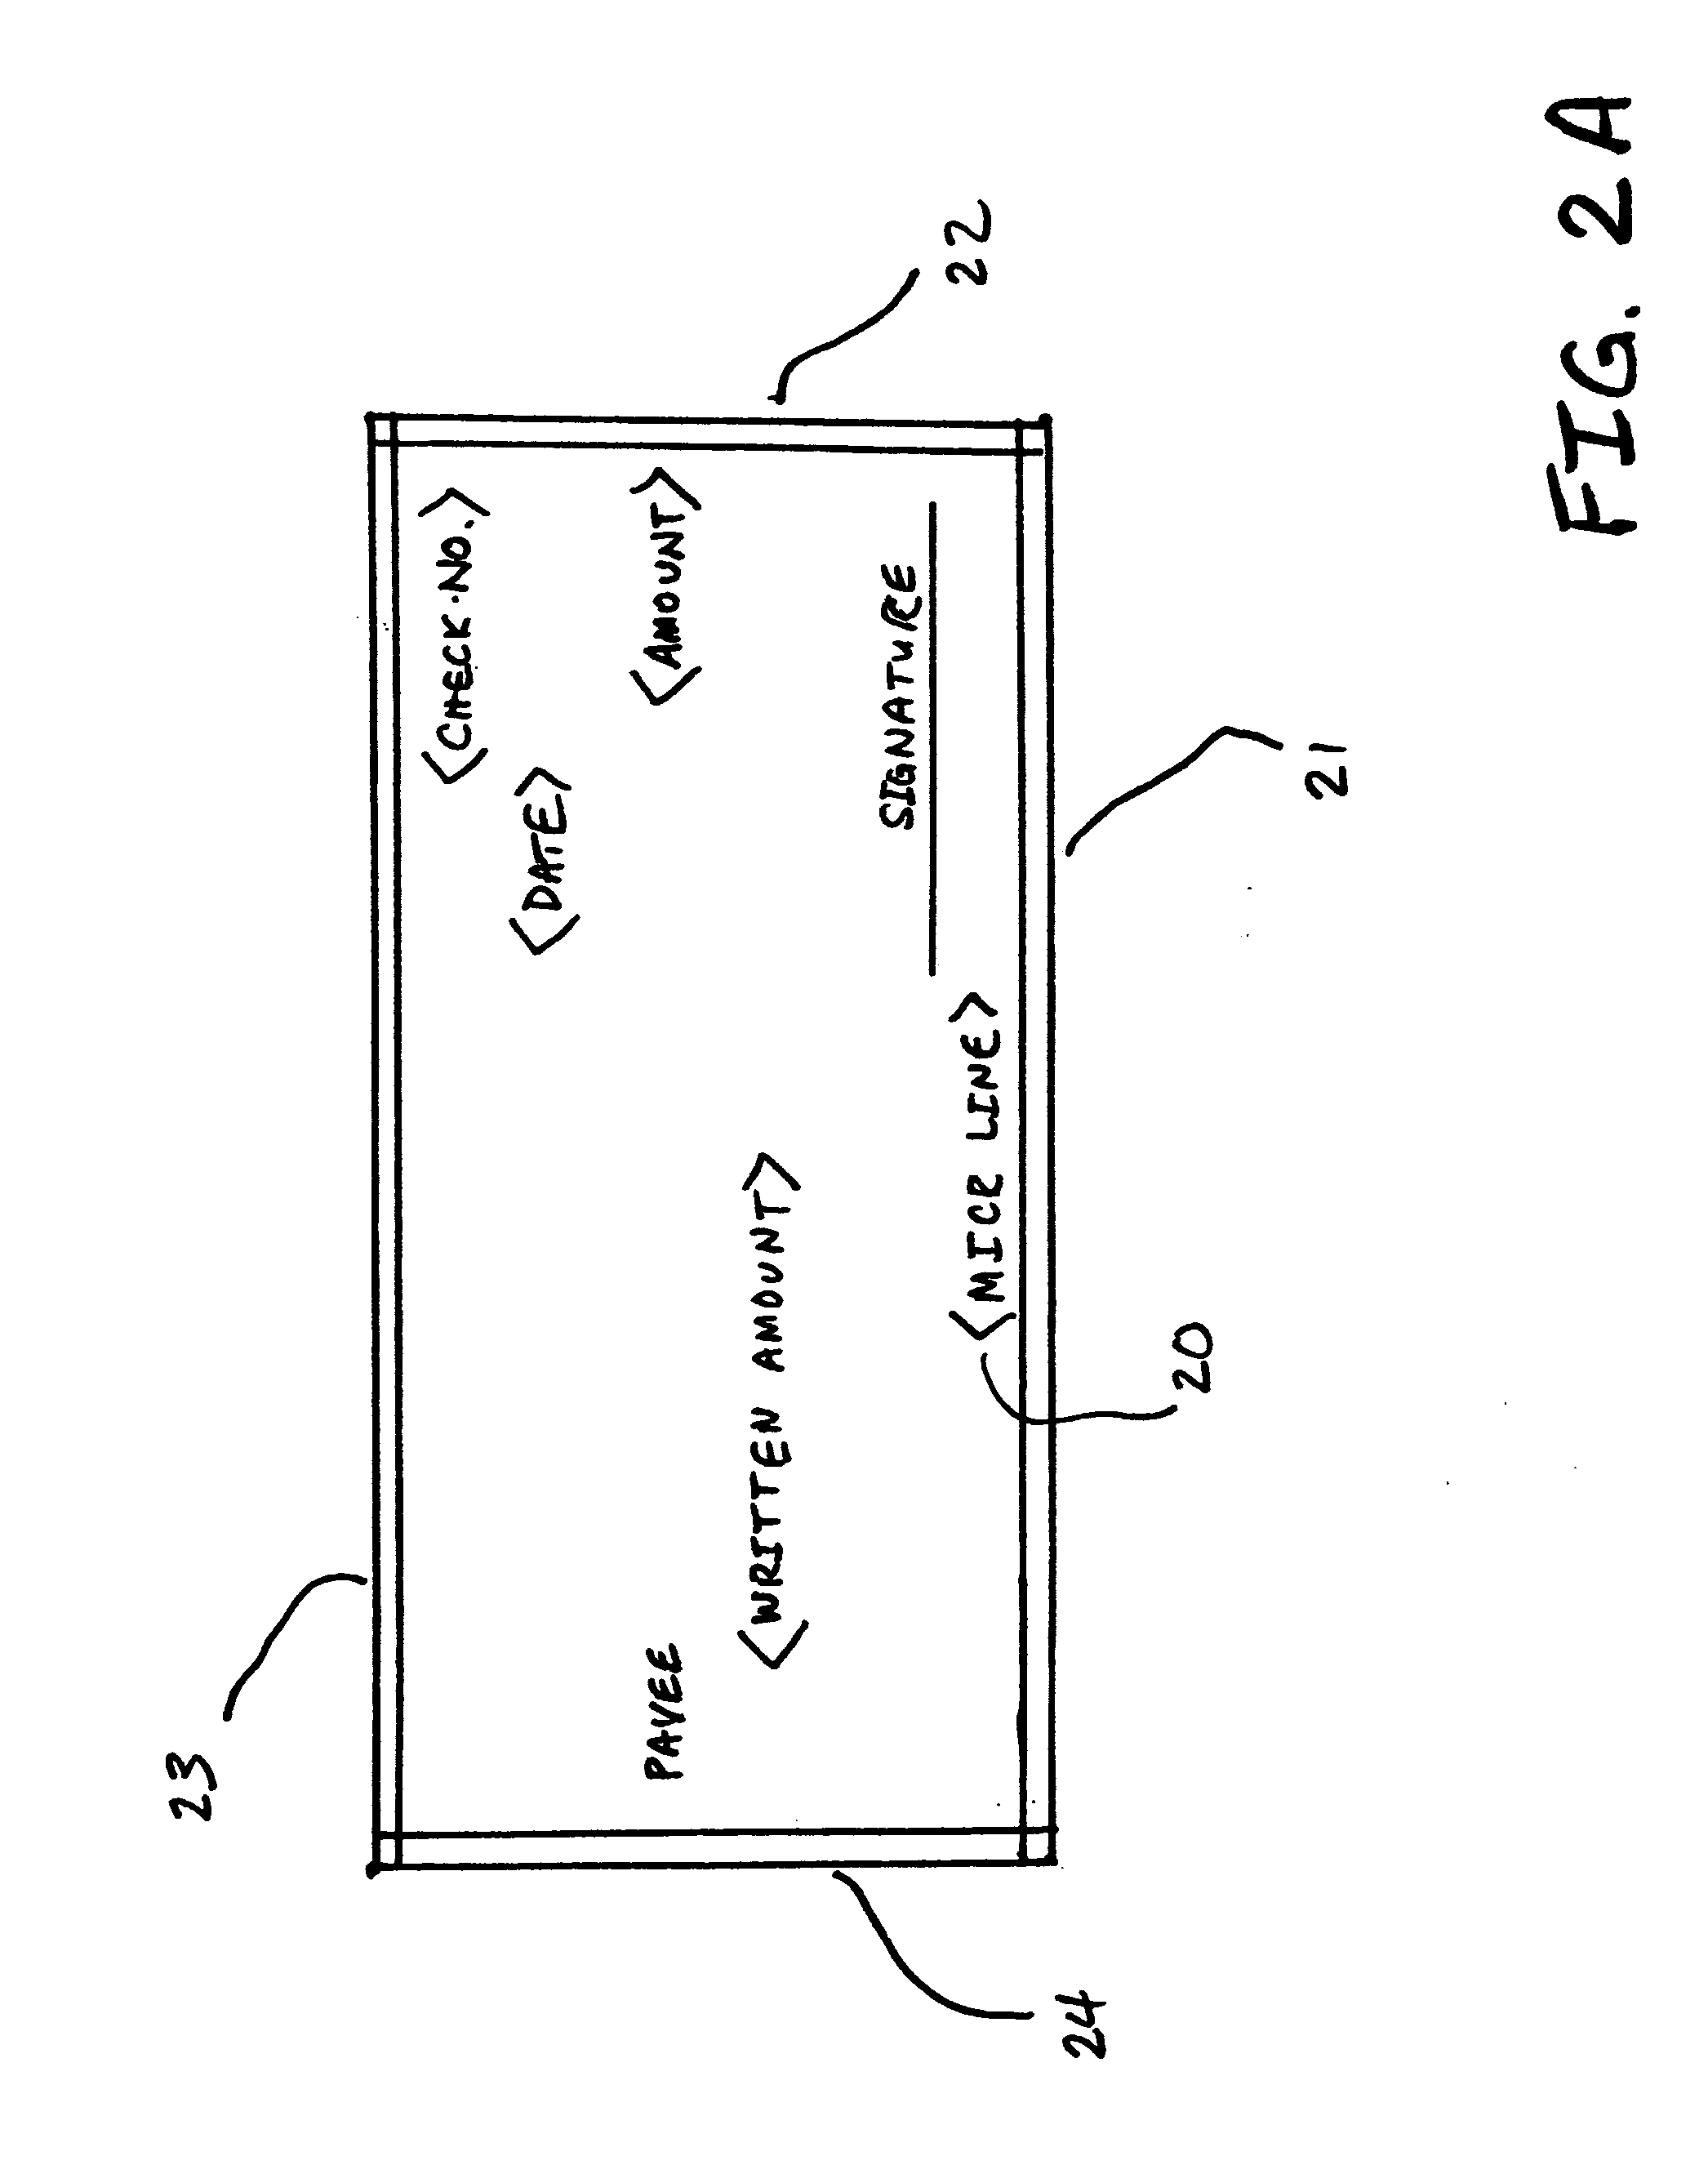 Bank check and method for positioning and interpreting a digital check within a defined region